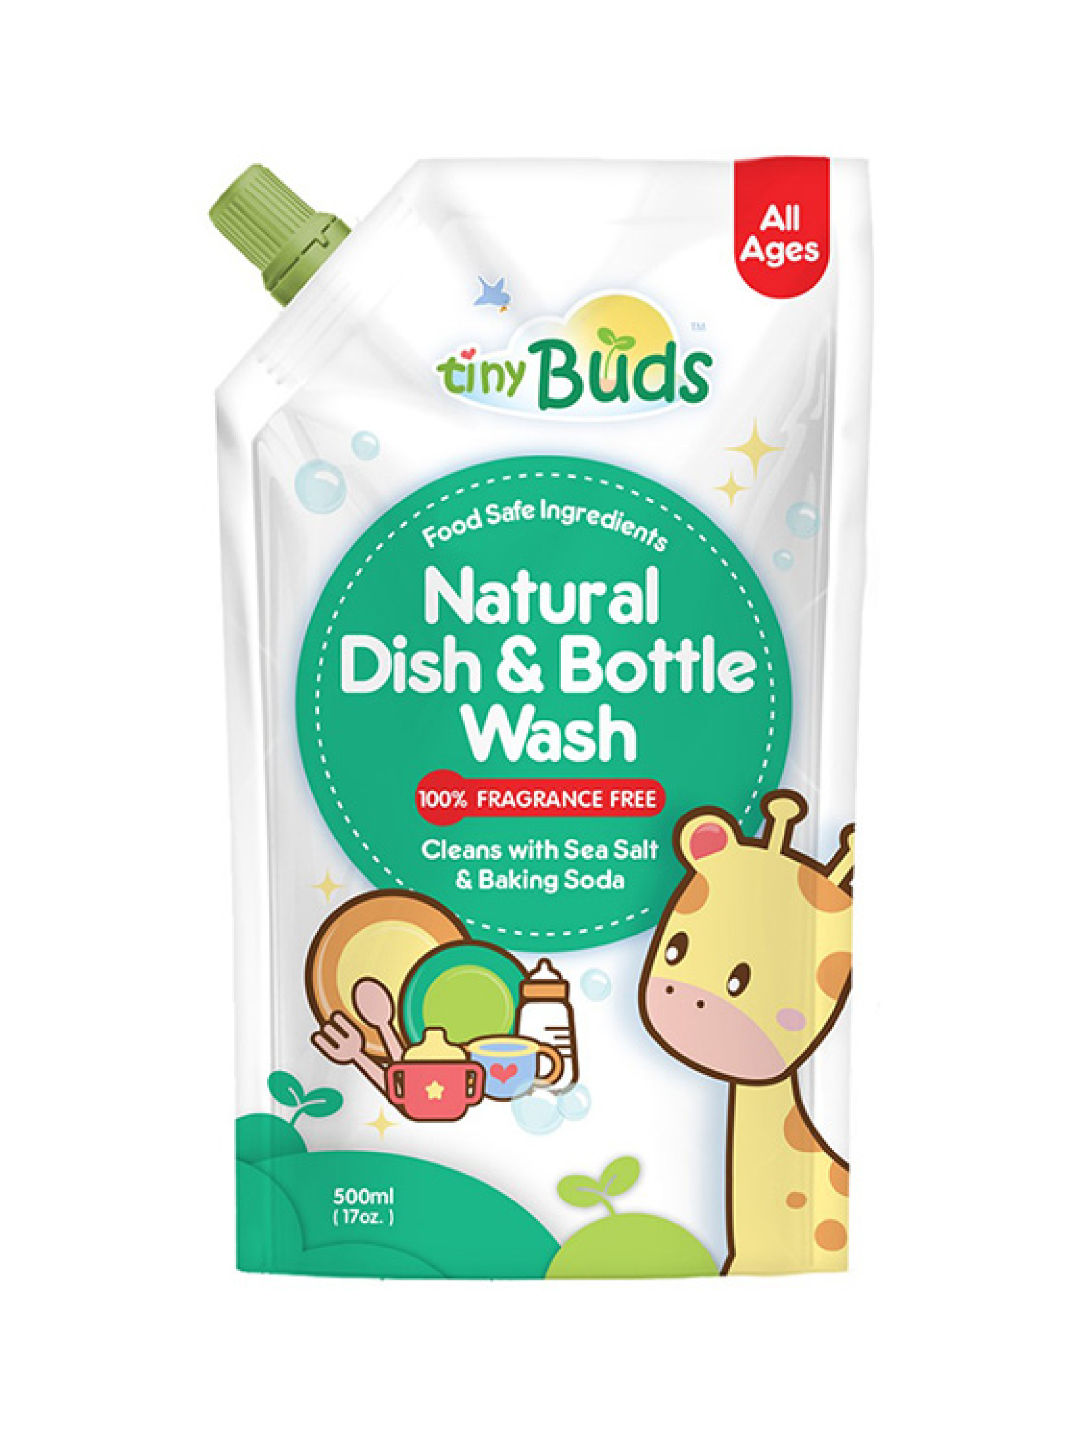 Tiny Buds Natural Dish & Bottle Wash Fragrance-Free Pouch (500ml)